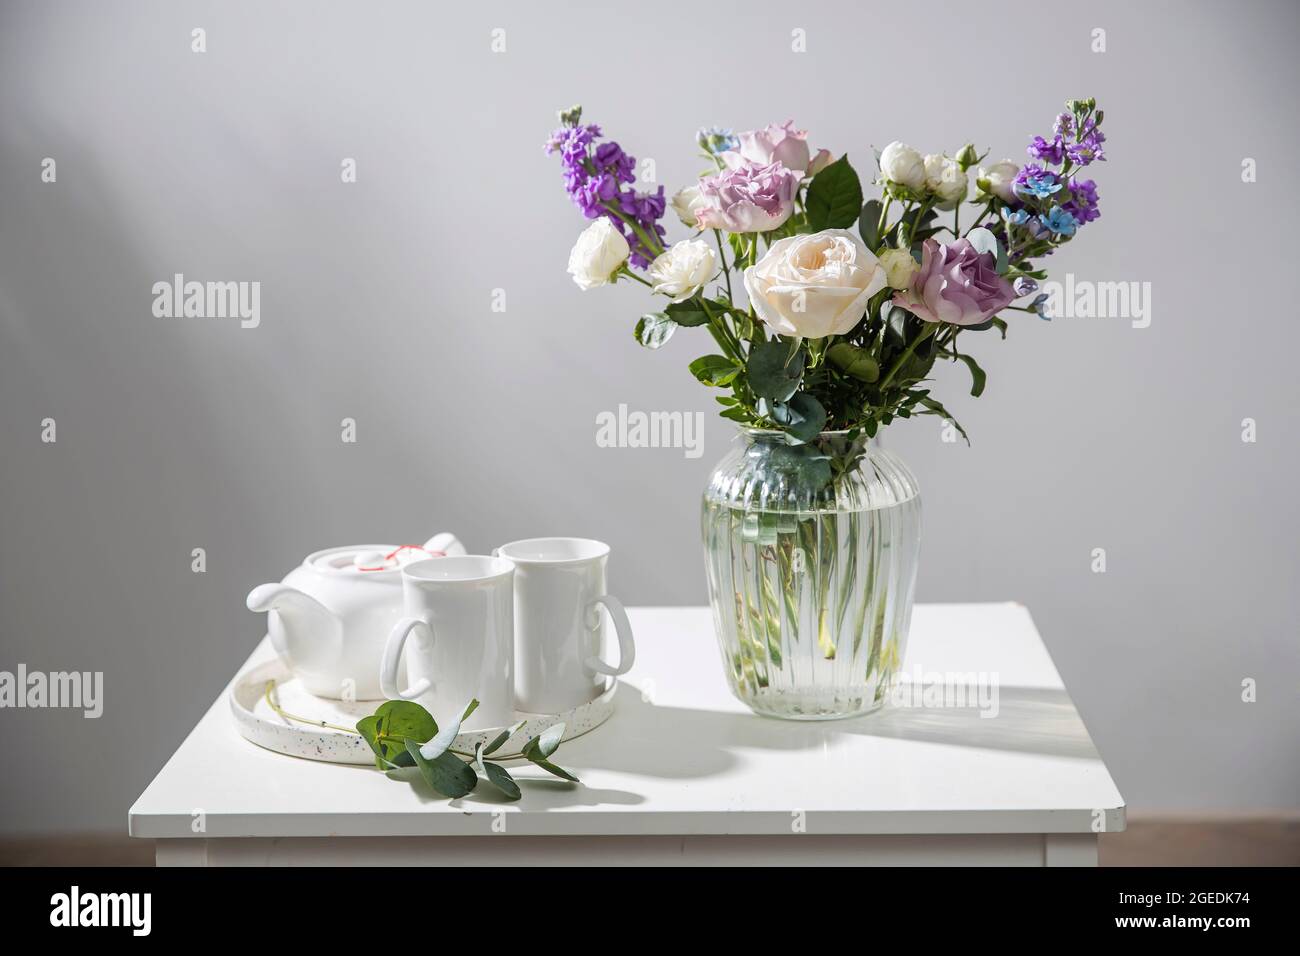 Bouquet of hackelia velutina, purple and white roses, small tea roses, matthiola incana and blue iris in glass vase is on the white coffee table. Grey Stock Photo